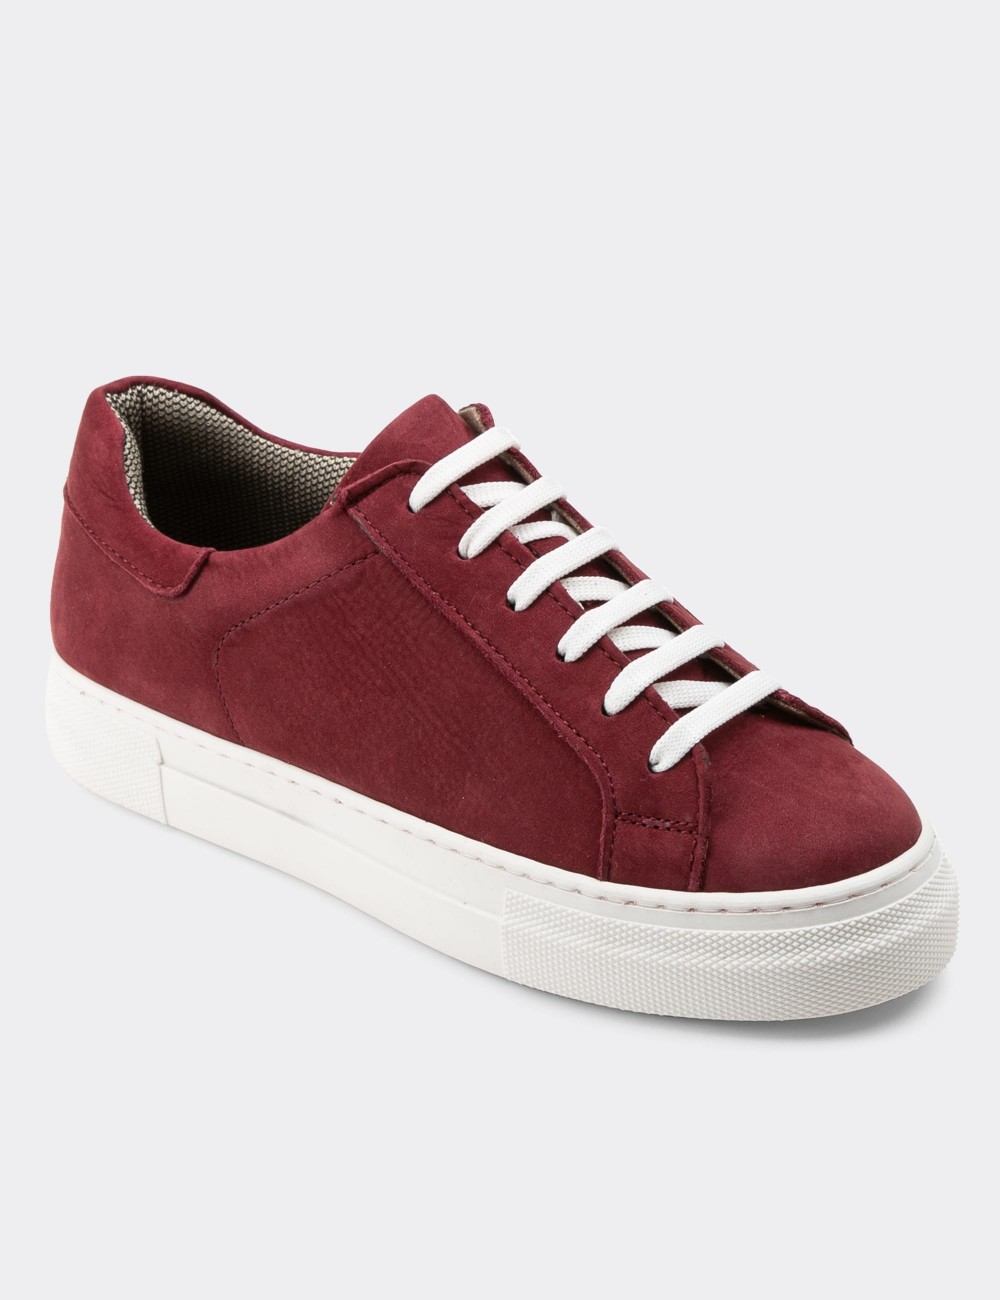 Burgundy Suede Leather Sneakers - Z1681ZBRDC12